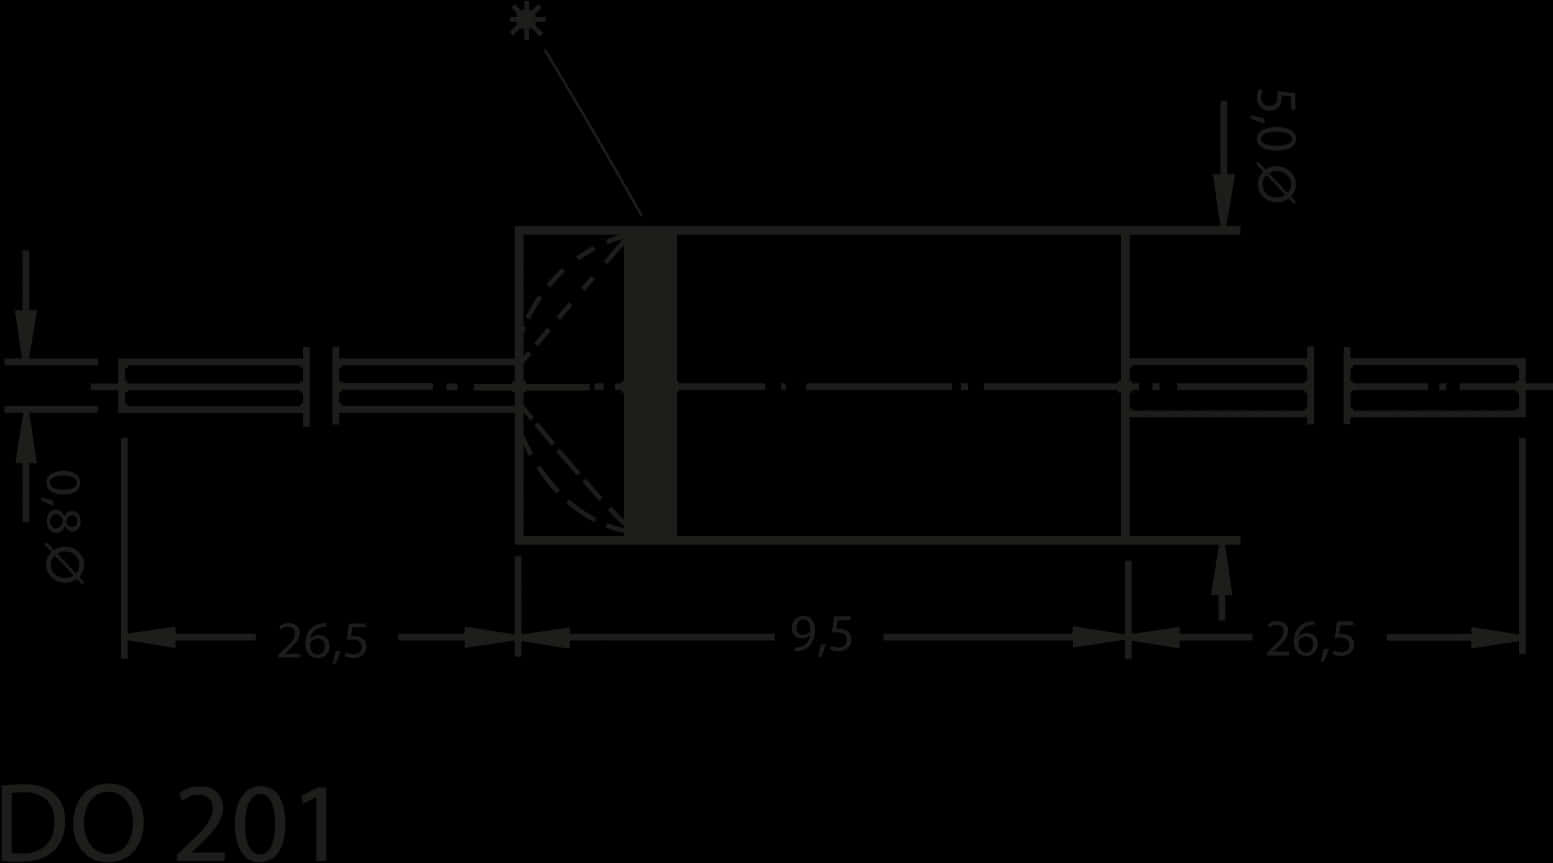 Technical Drawing Black Background PNG